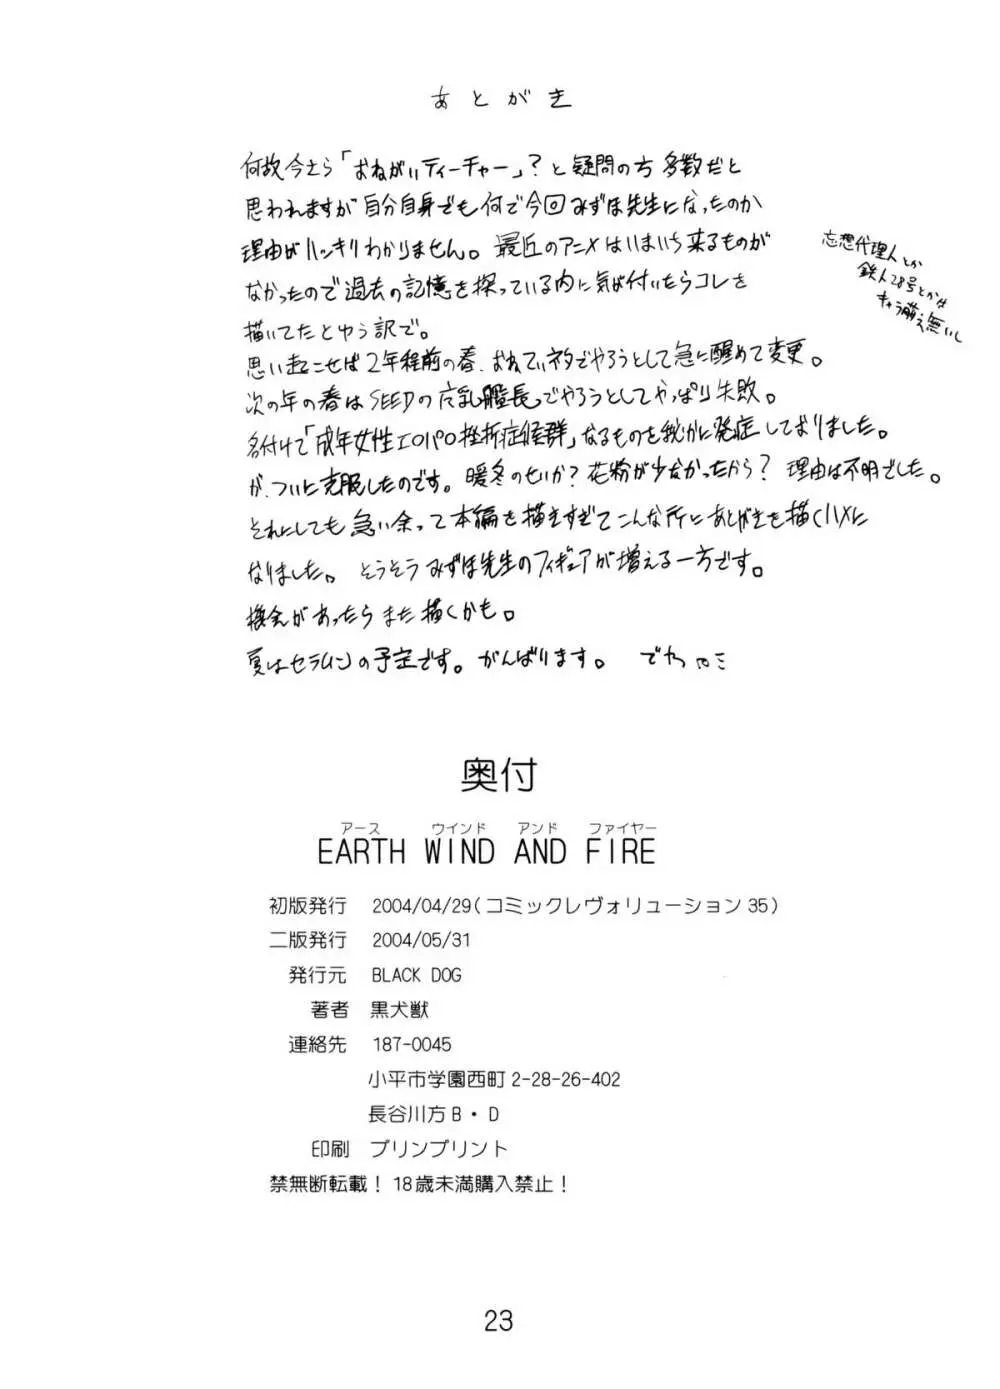 EARTH WIND AND FIRE 22ページ